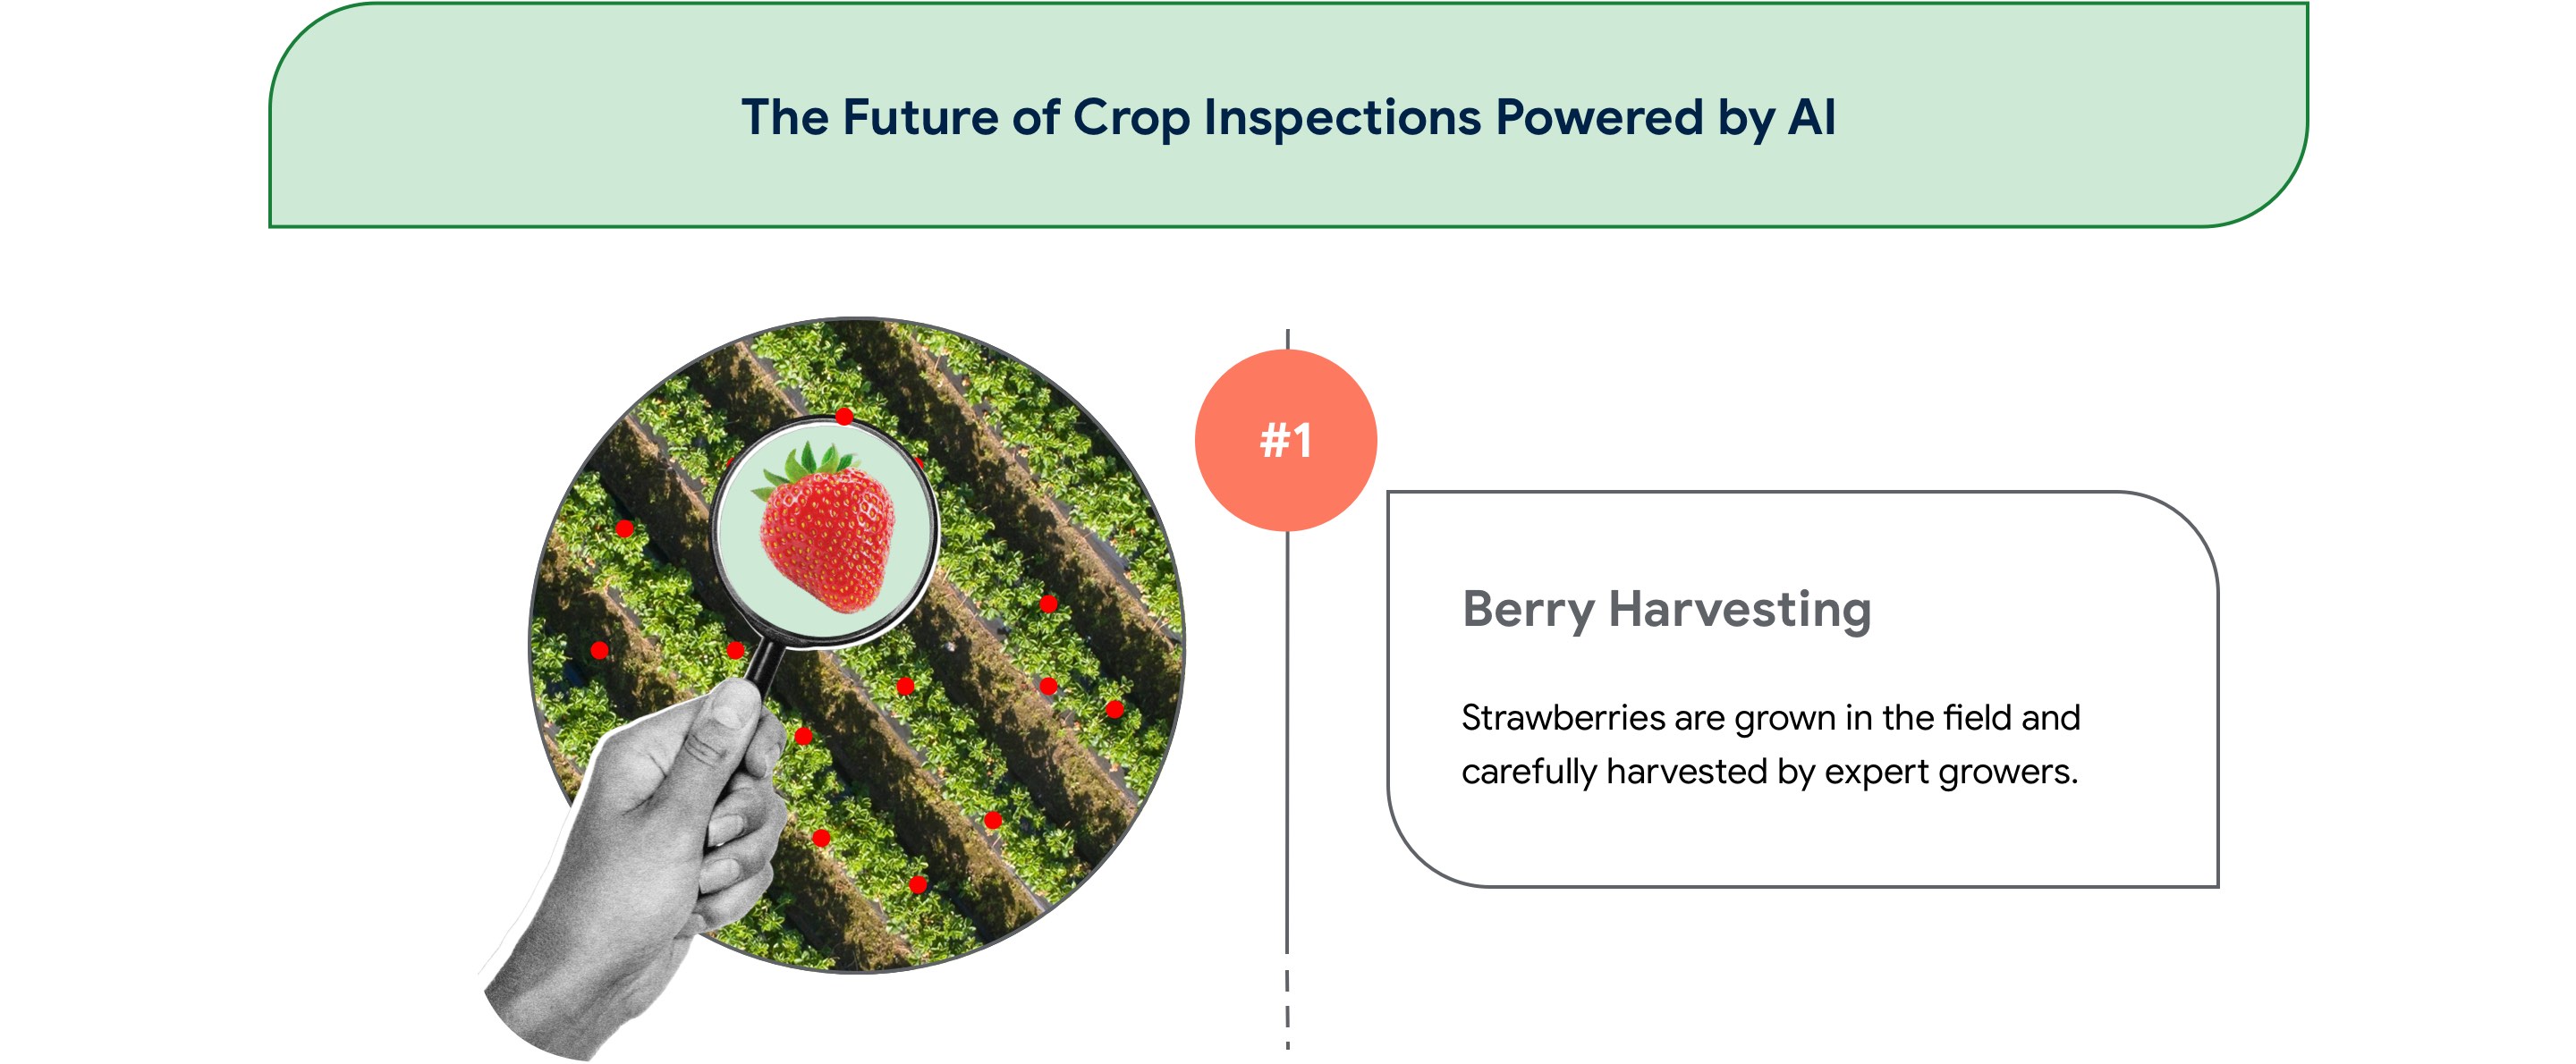 The Future of Crop Inspections Powered by AI  Berry Harvesting  Strawberries are grown in the field and carefully harvested by expert growers.